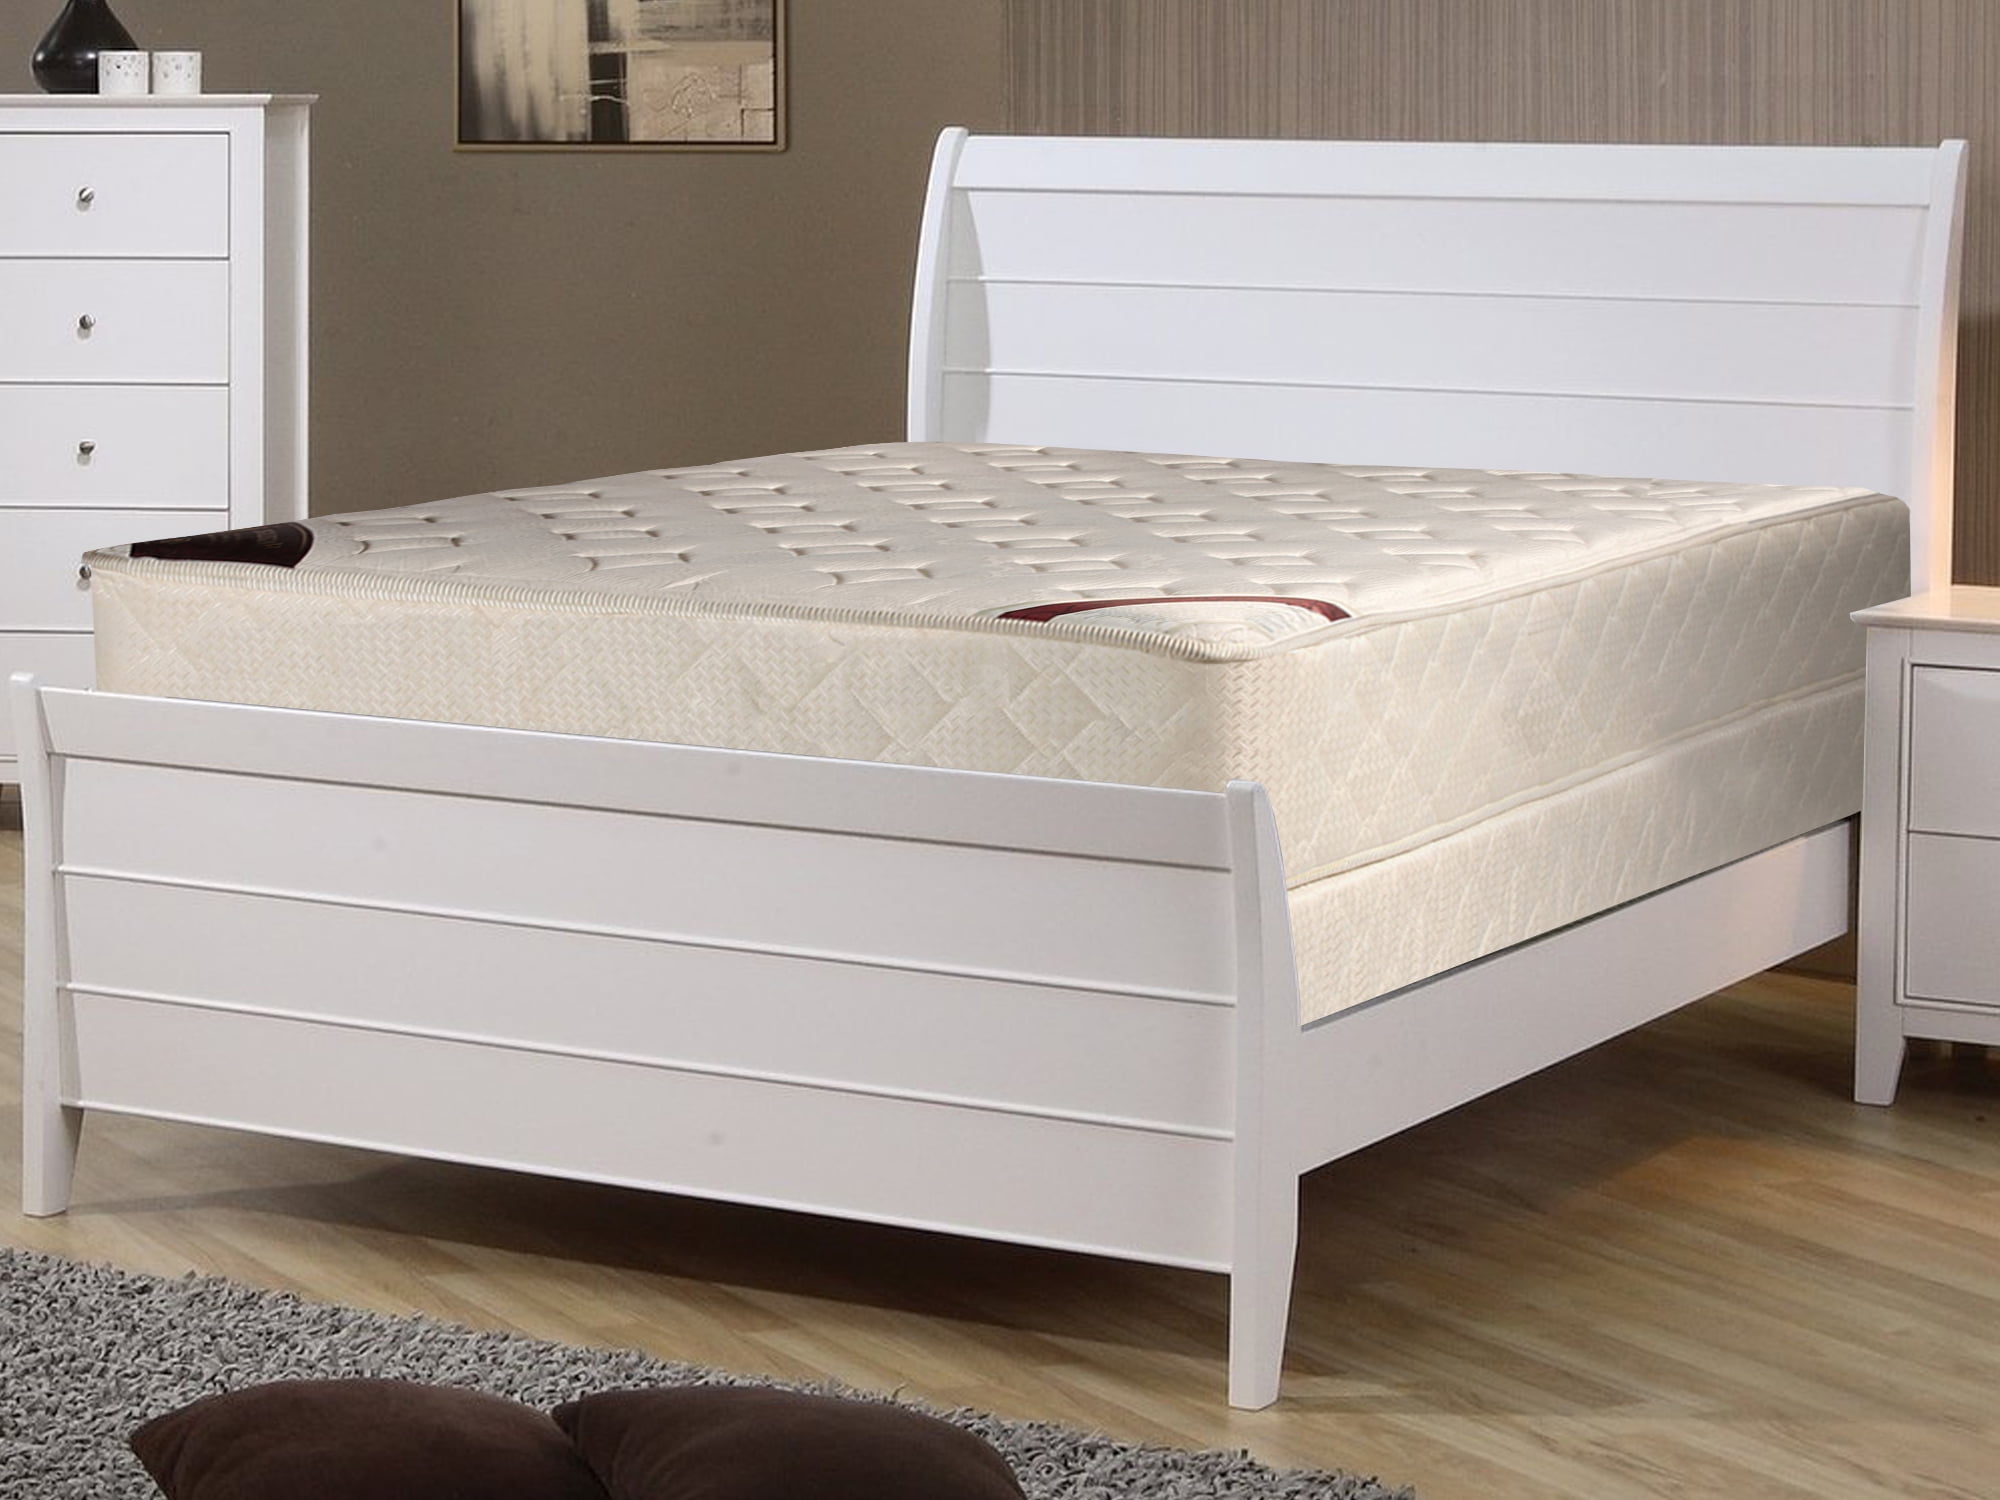 fantastic furniture sleep tight double mattress review